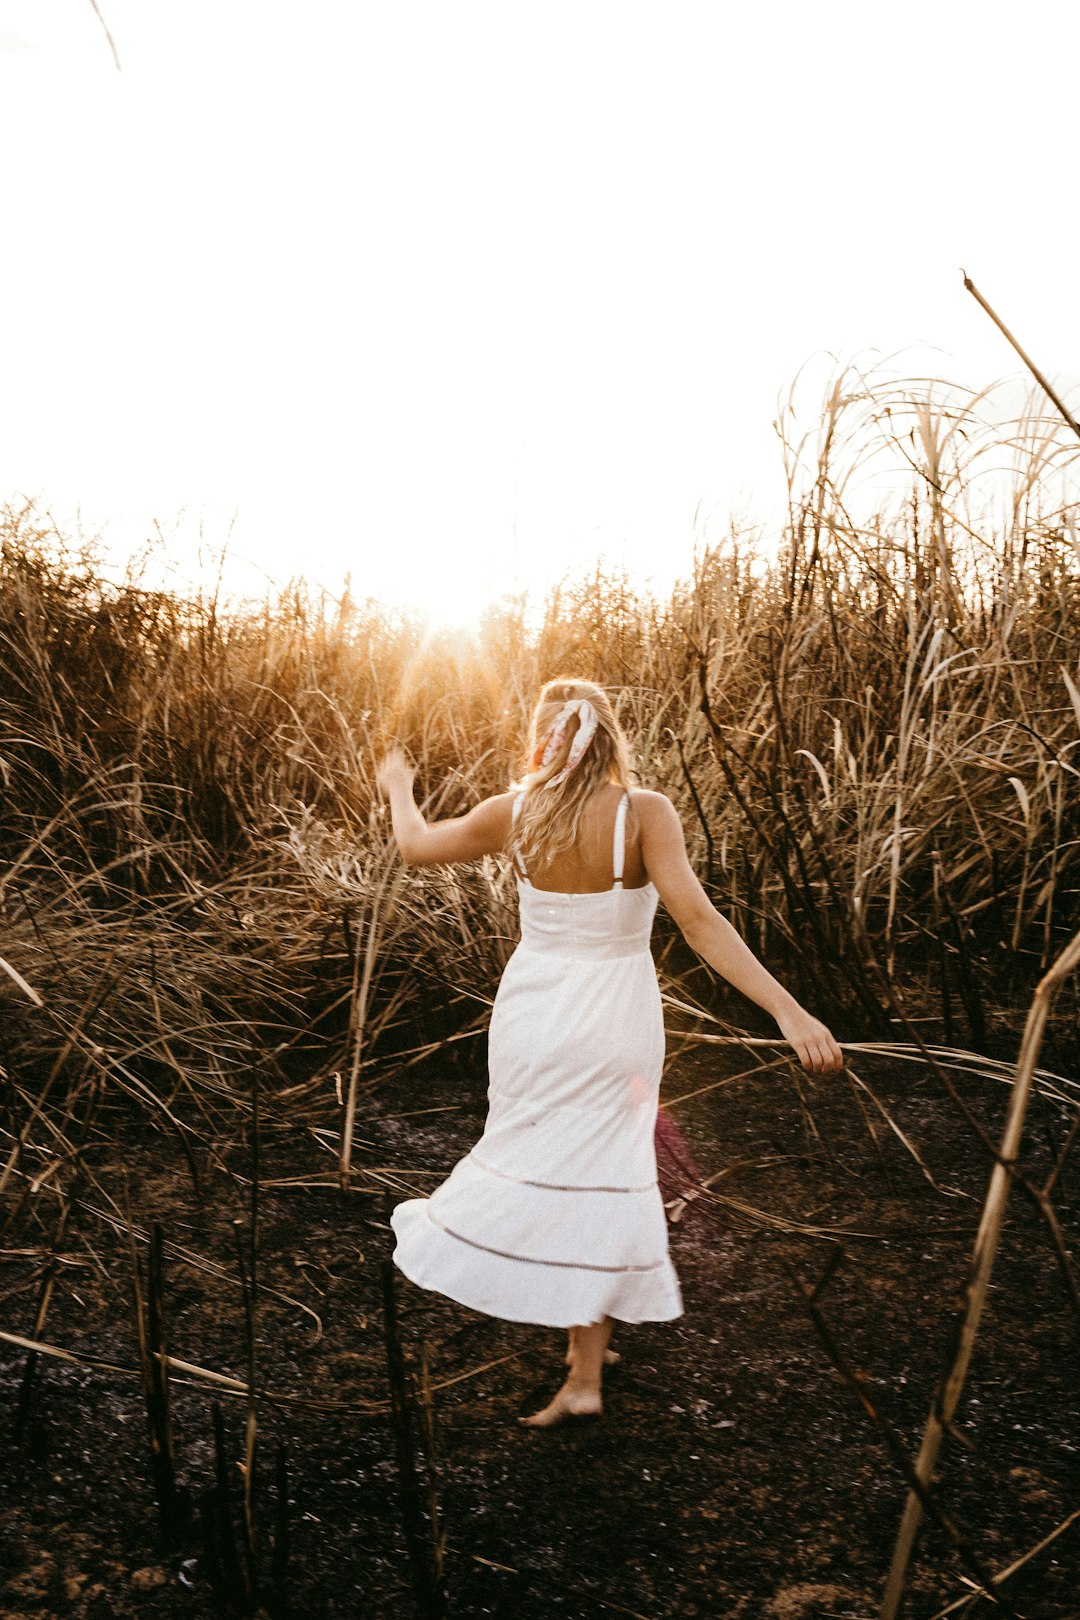 woman in white dress standing on brown grass field during daytime